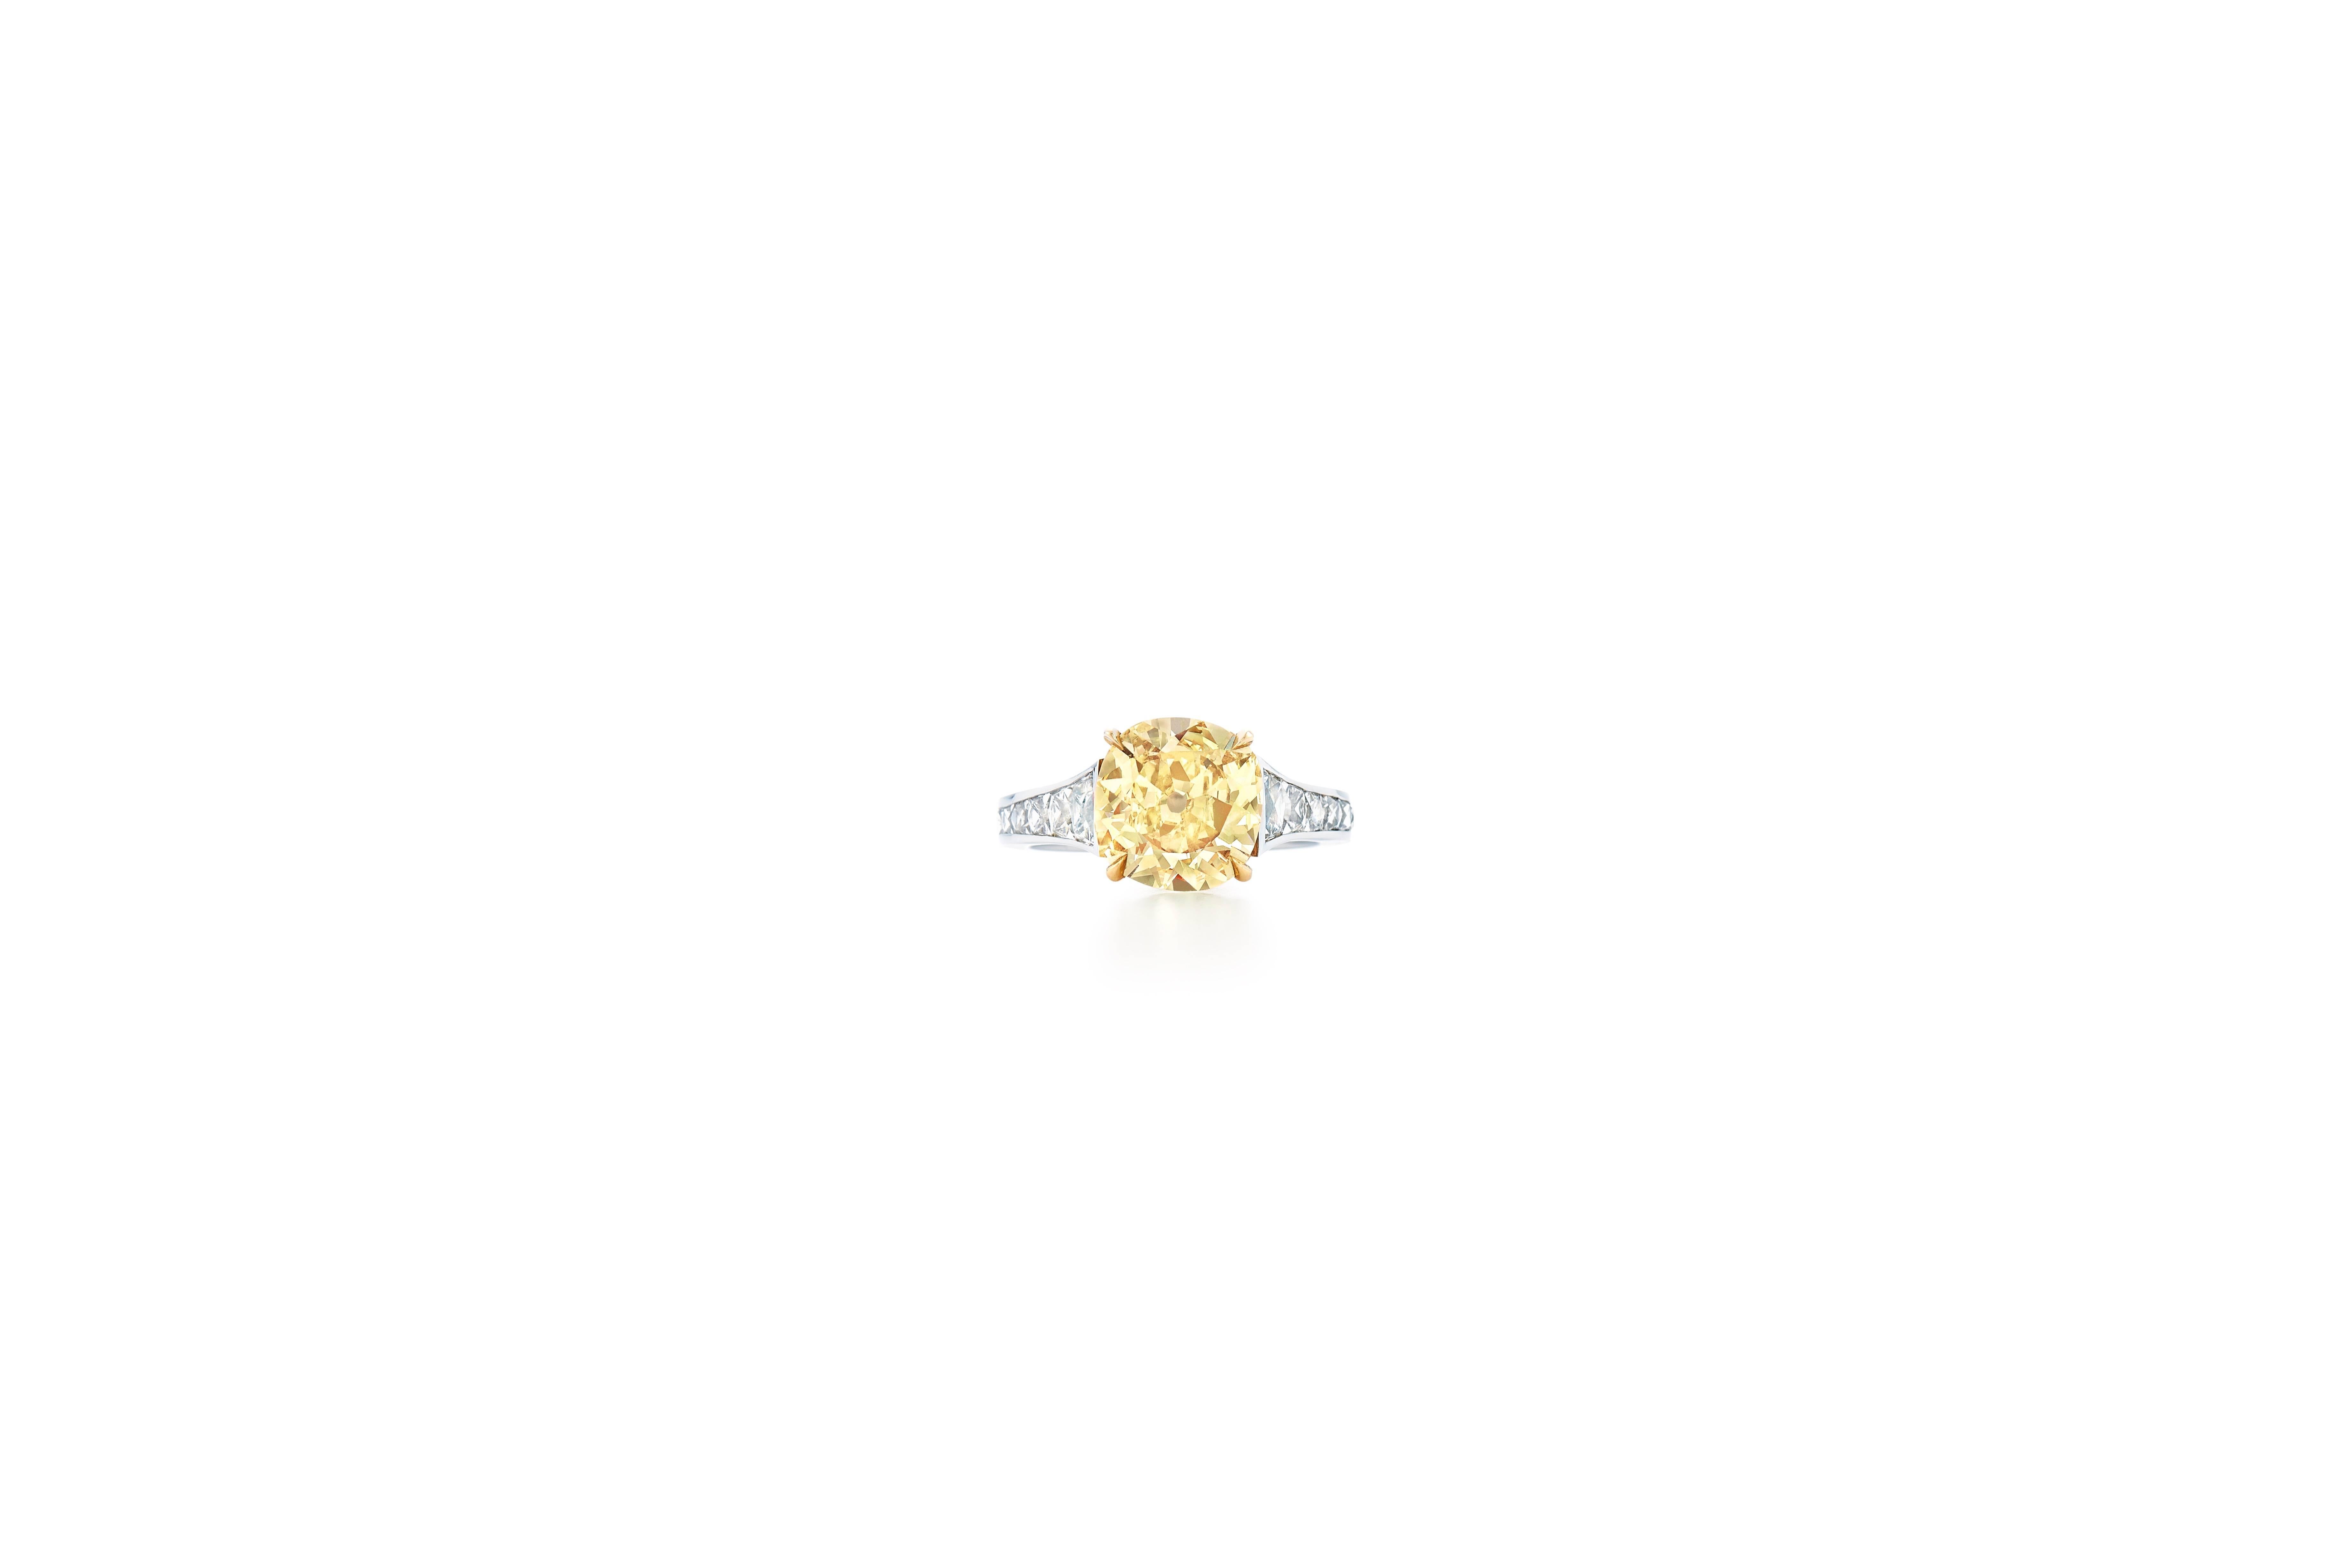 This ring is set with a cushion-cut diamond weighing approximately 3.16 carats, flanked on each side by a tapered series of 14 French-cut diamonds, weighing a total of 1.16 carats, and is mounted in platinum and 18k yellow gold, signed Fred